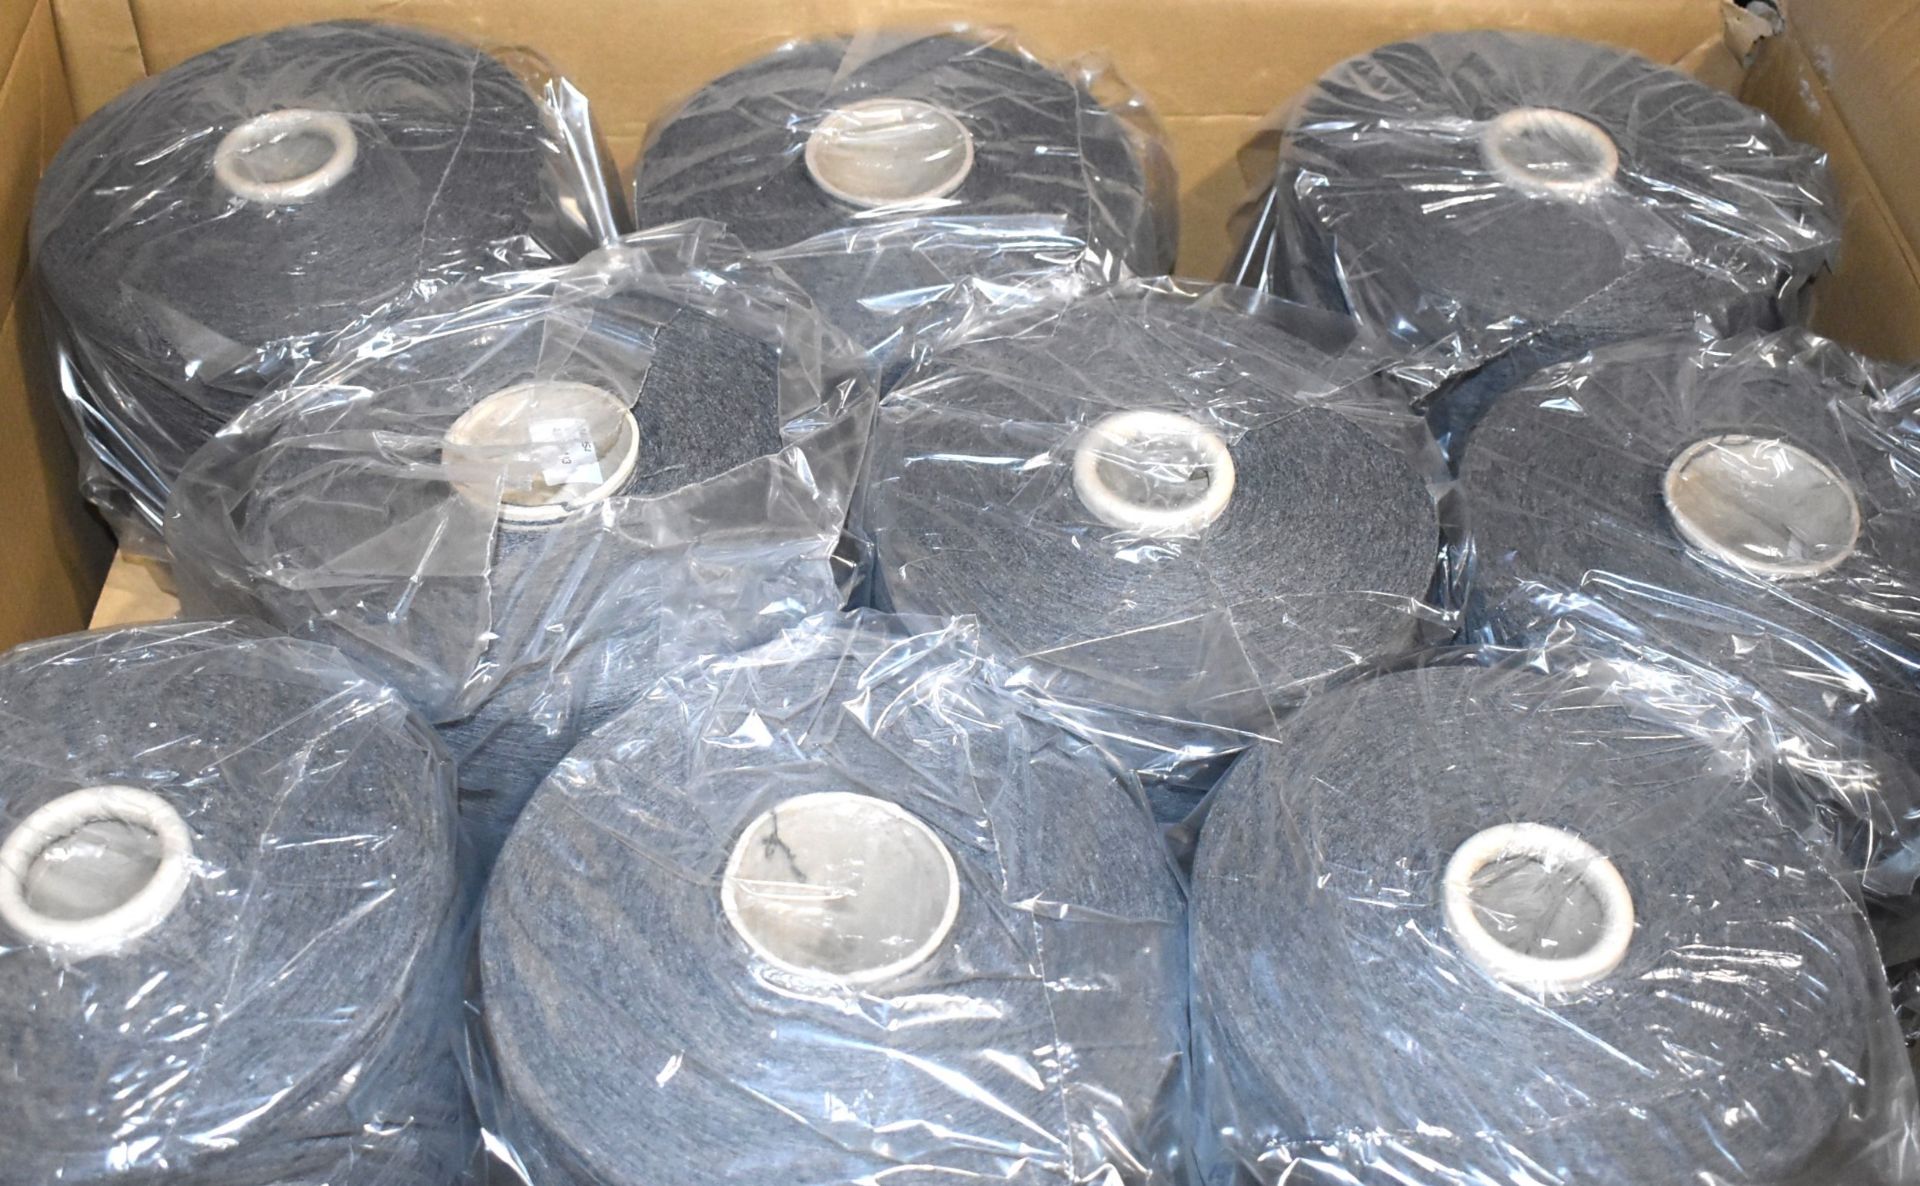 18 x Cones of 1/13 MicroCotton Knitting Yarn - Mid Grey - Approx Weight: 2,500g - New Stock ABL Yarn - Image 2 of 12